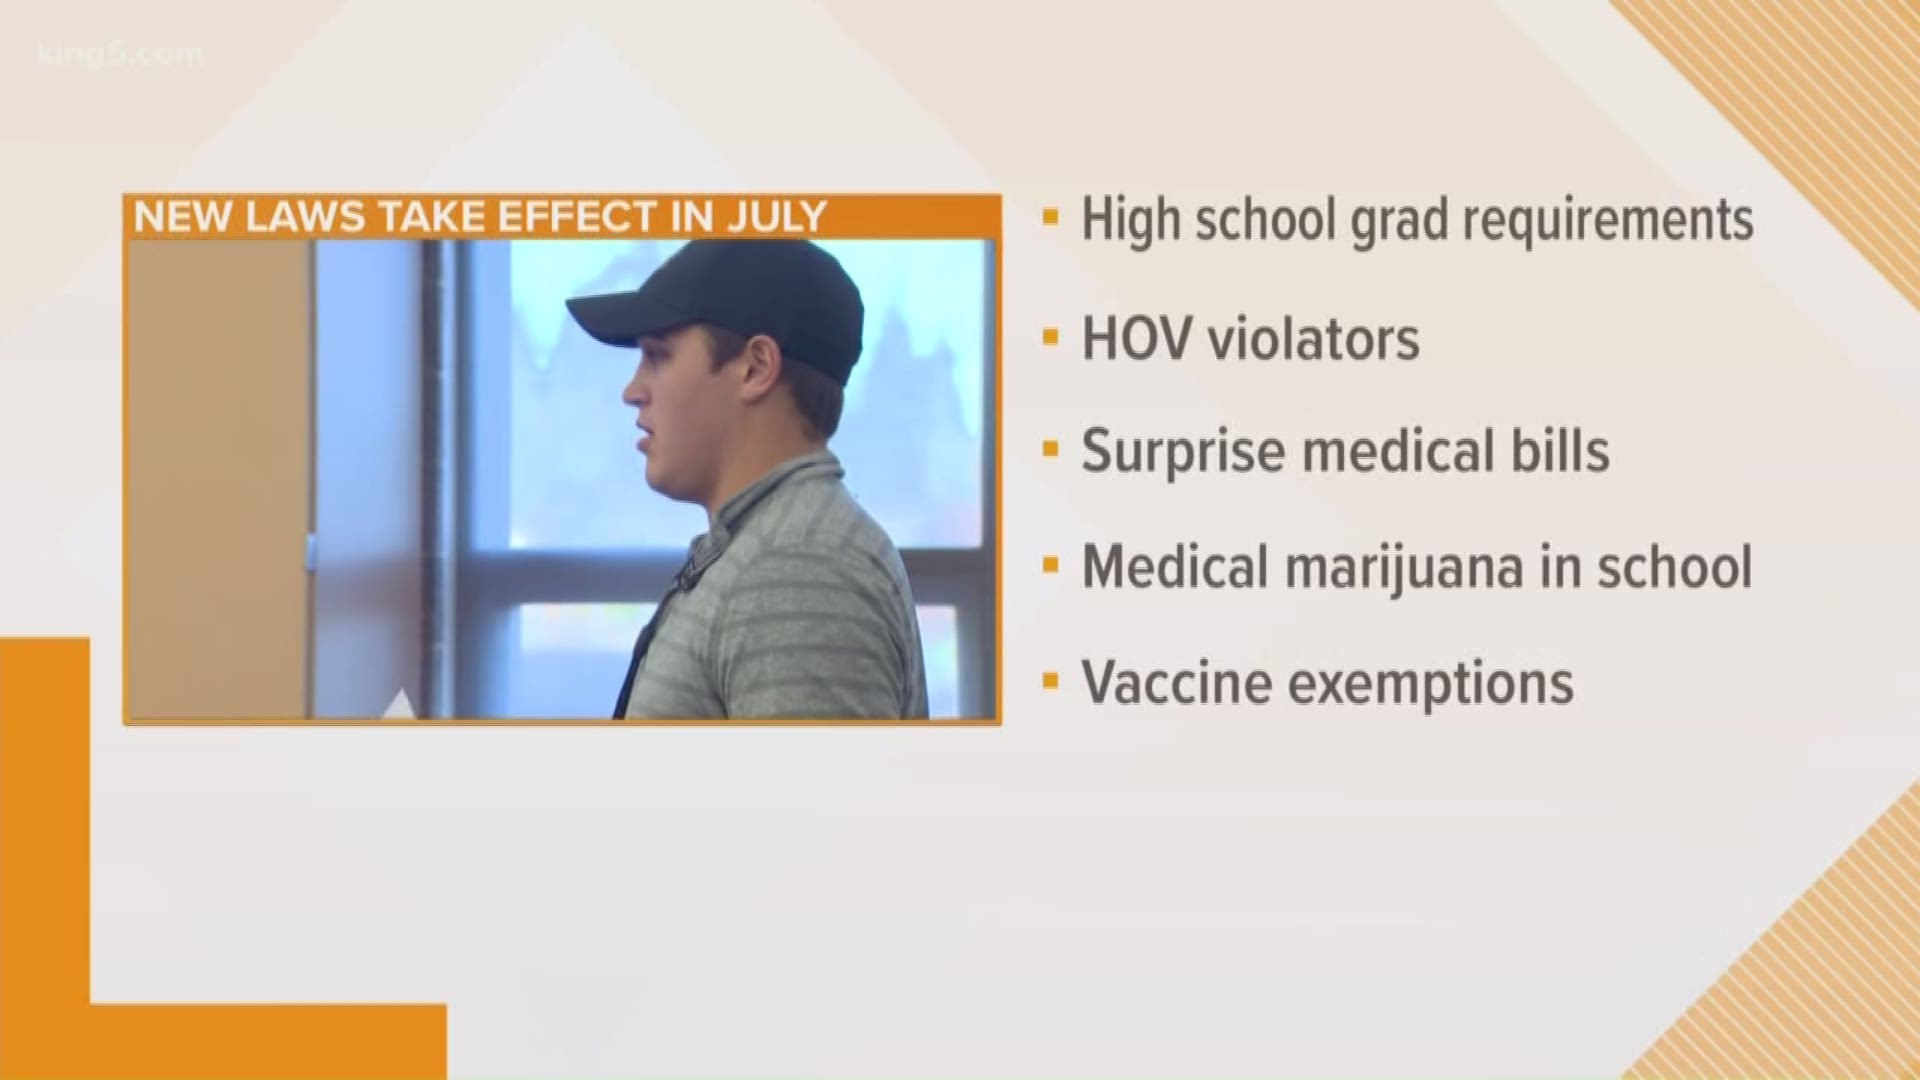 Hundreds of new laws go into effect in July in Washington, including measures involving high school graduation requirements, HOV lane violators, and medical marijuana in schools.